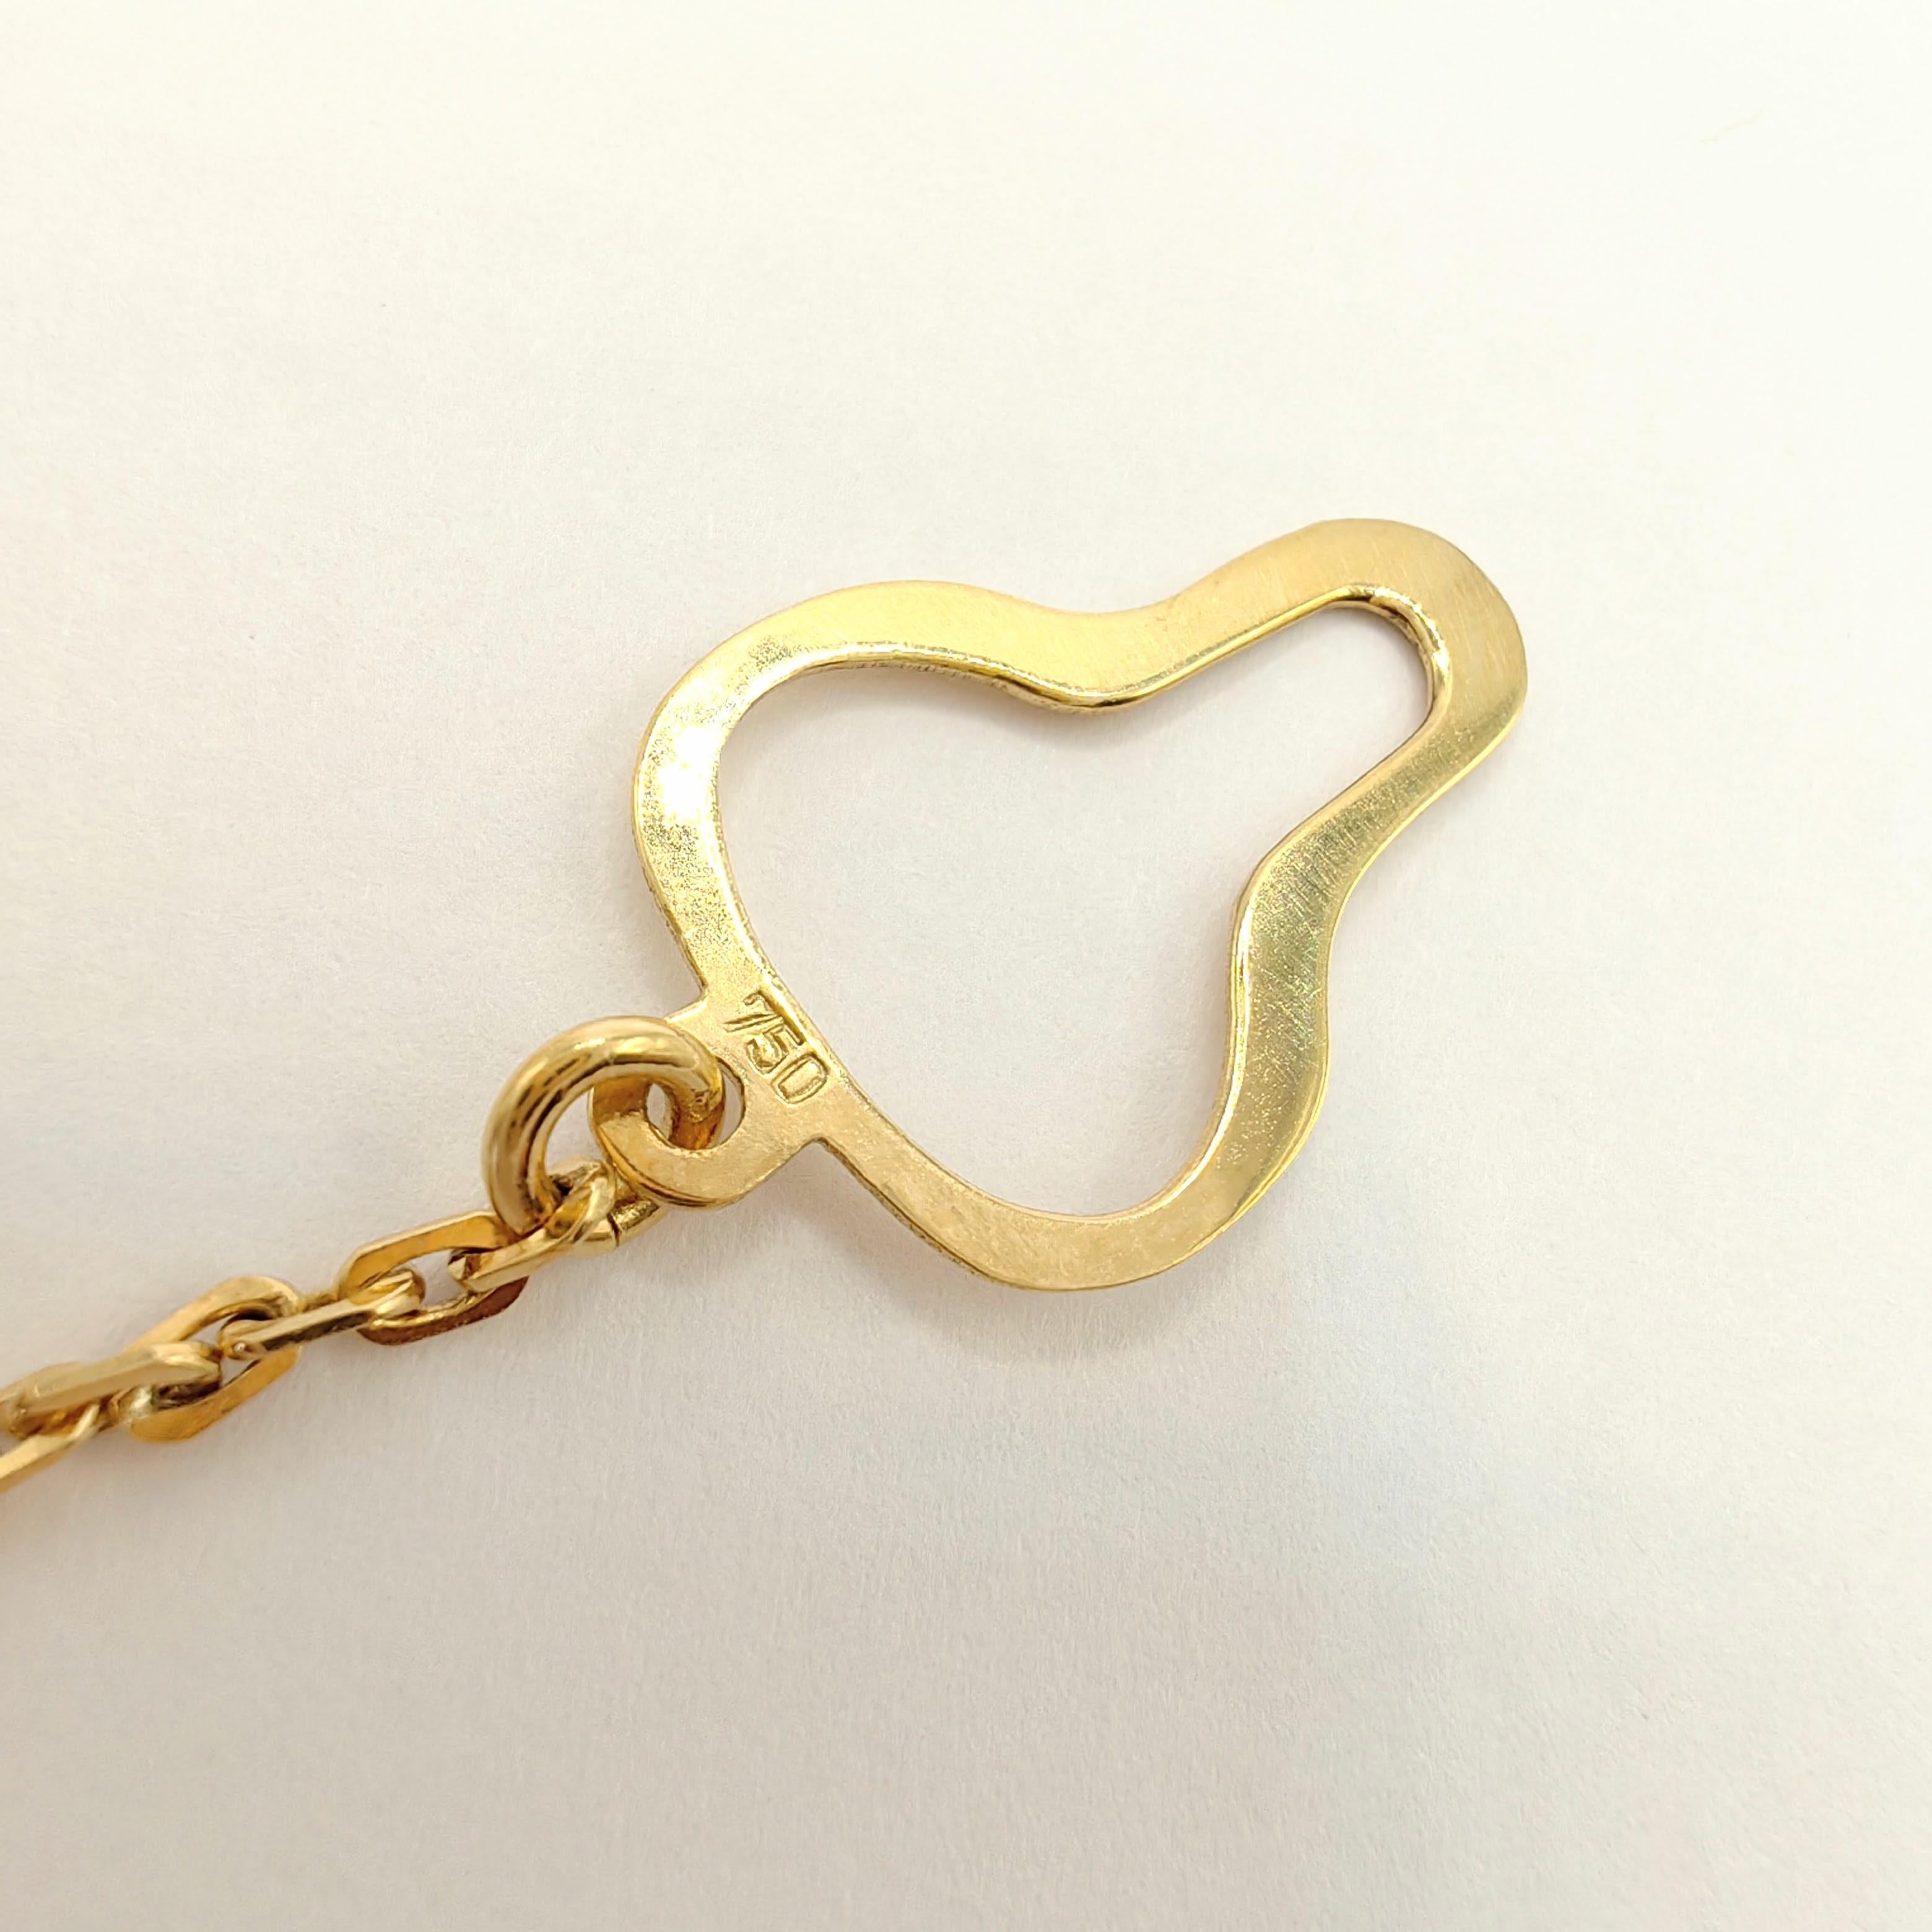 Vintage Fan Shape Tie Clip With Chain in 18K Yellow & White Two-tone Gold For Sale 4